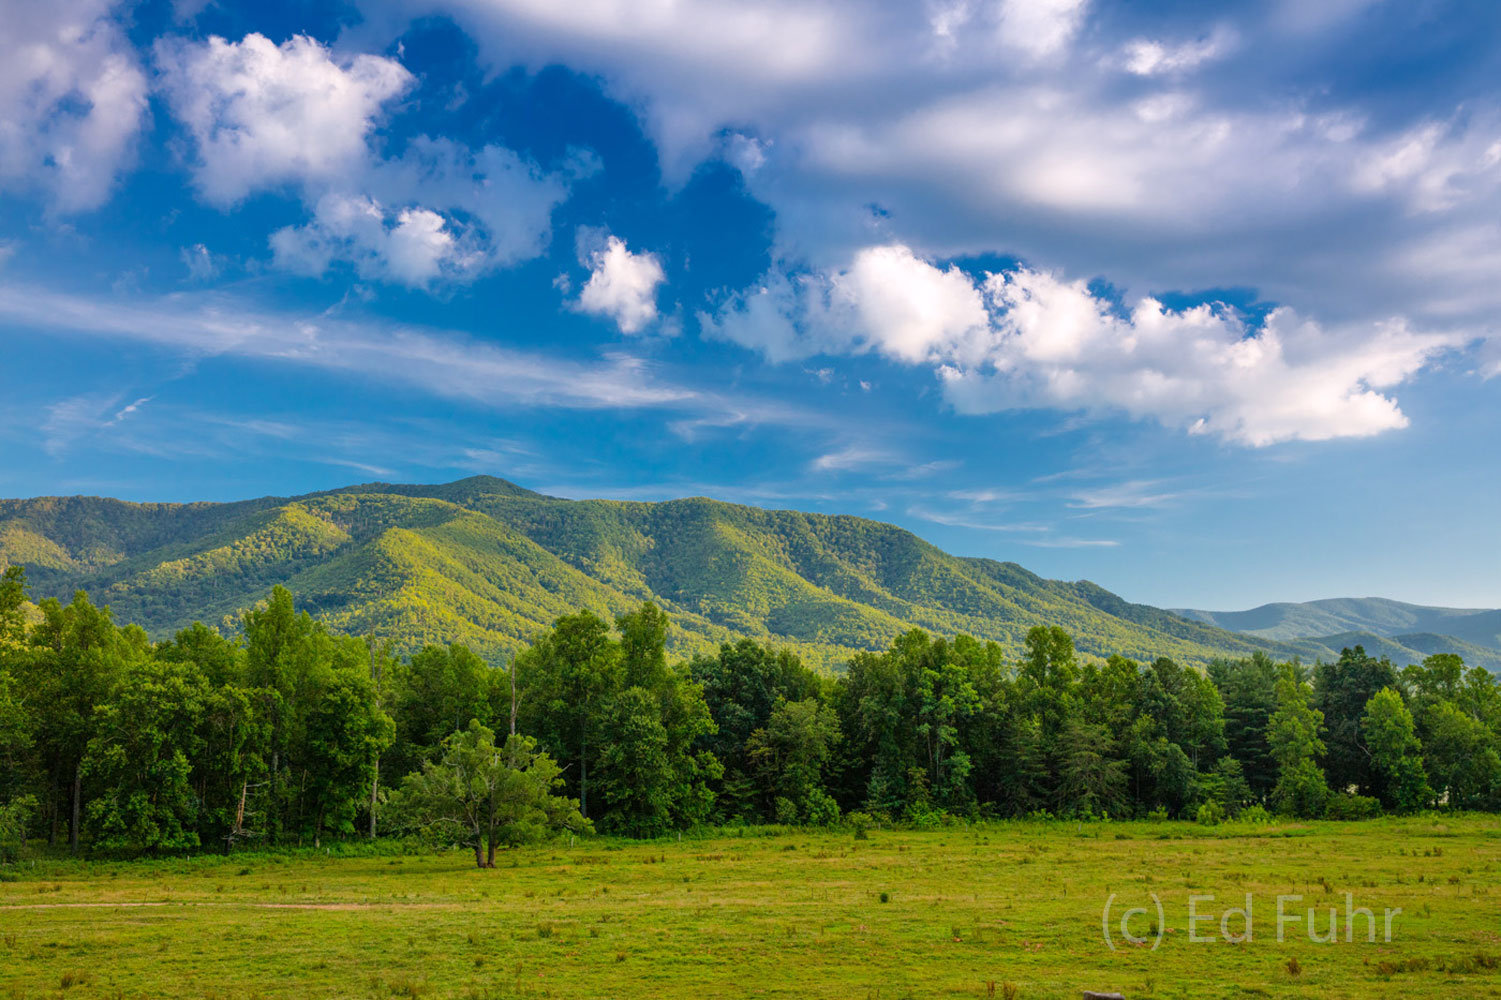 A vibrant spring day in Cades Cove with views that stretch for miles.